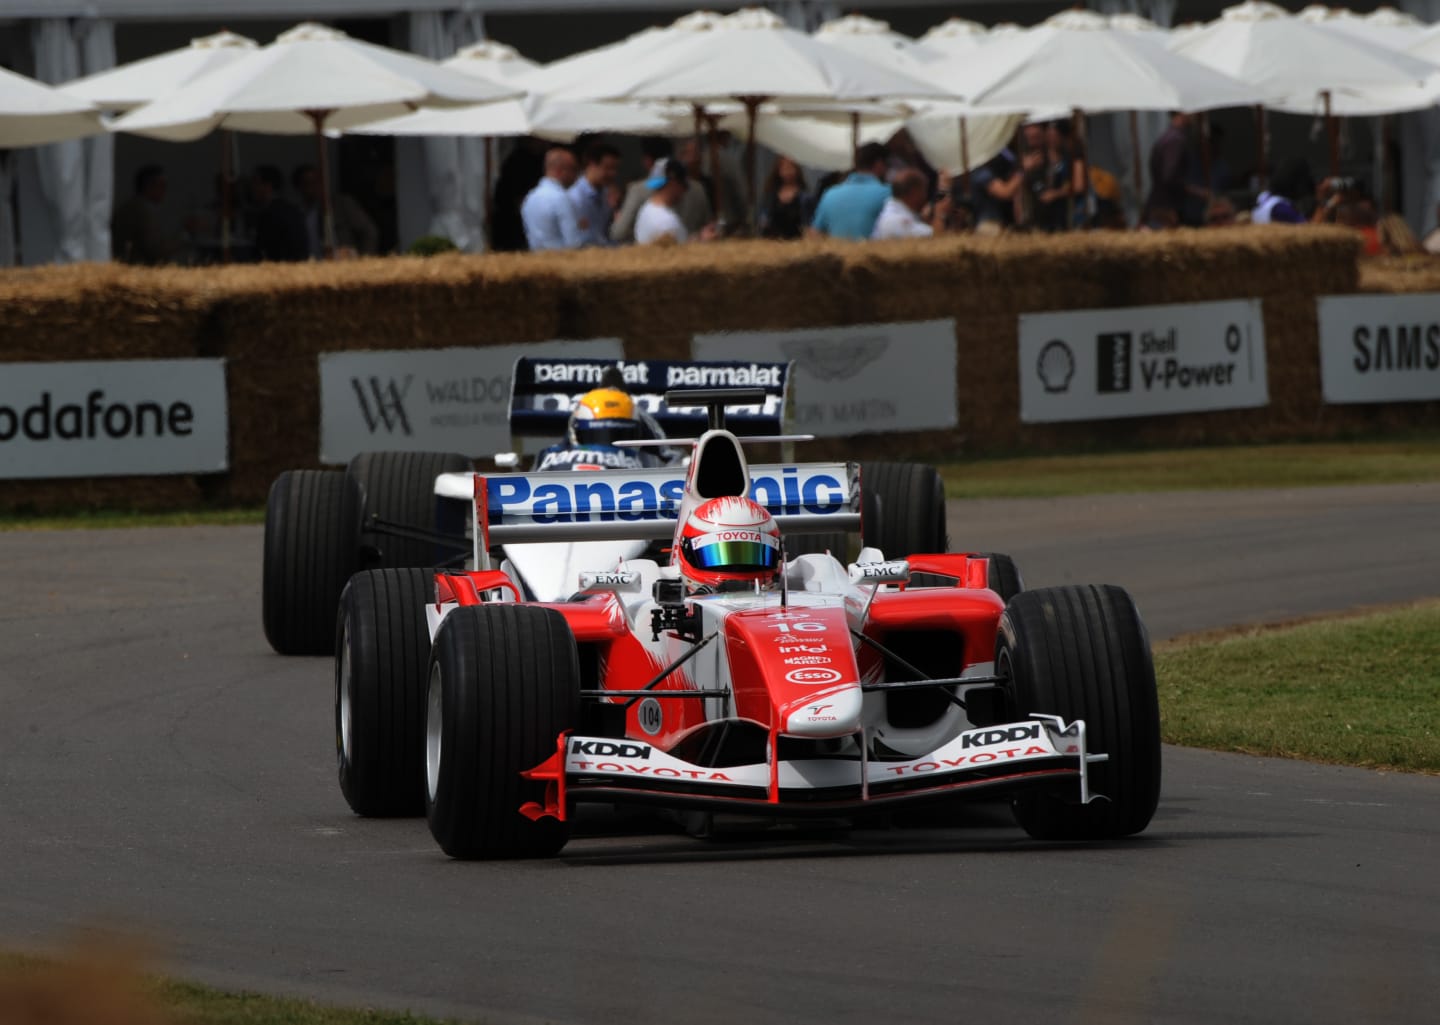 www.sutton-images.com Toyota TF104 at Goodwood Festival of Speed, Goodwood, England, 30 June - 2 July 2017. © Sutton Images